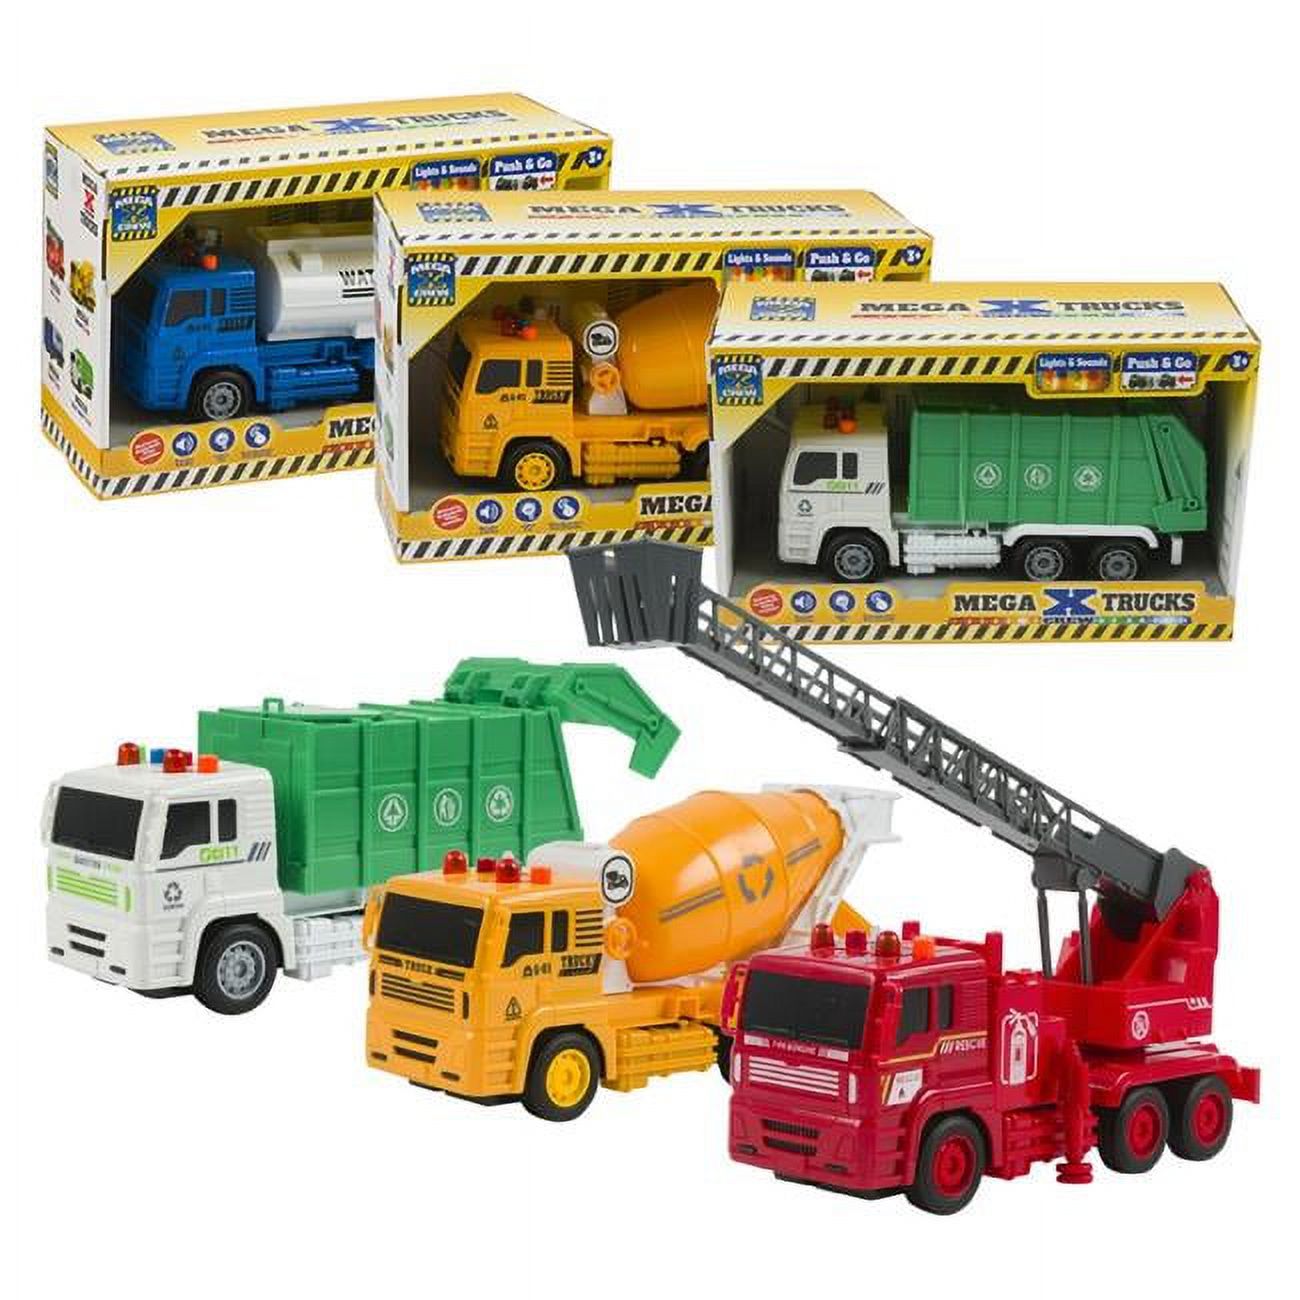 DDI 2361956 Toy Trucks with Lights & Music 4 Assortments - Case of 12 - image 1 of 1